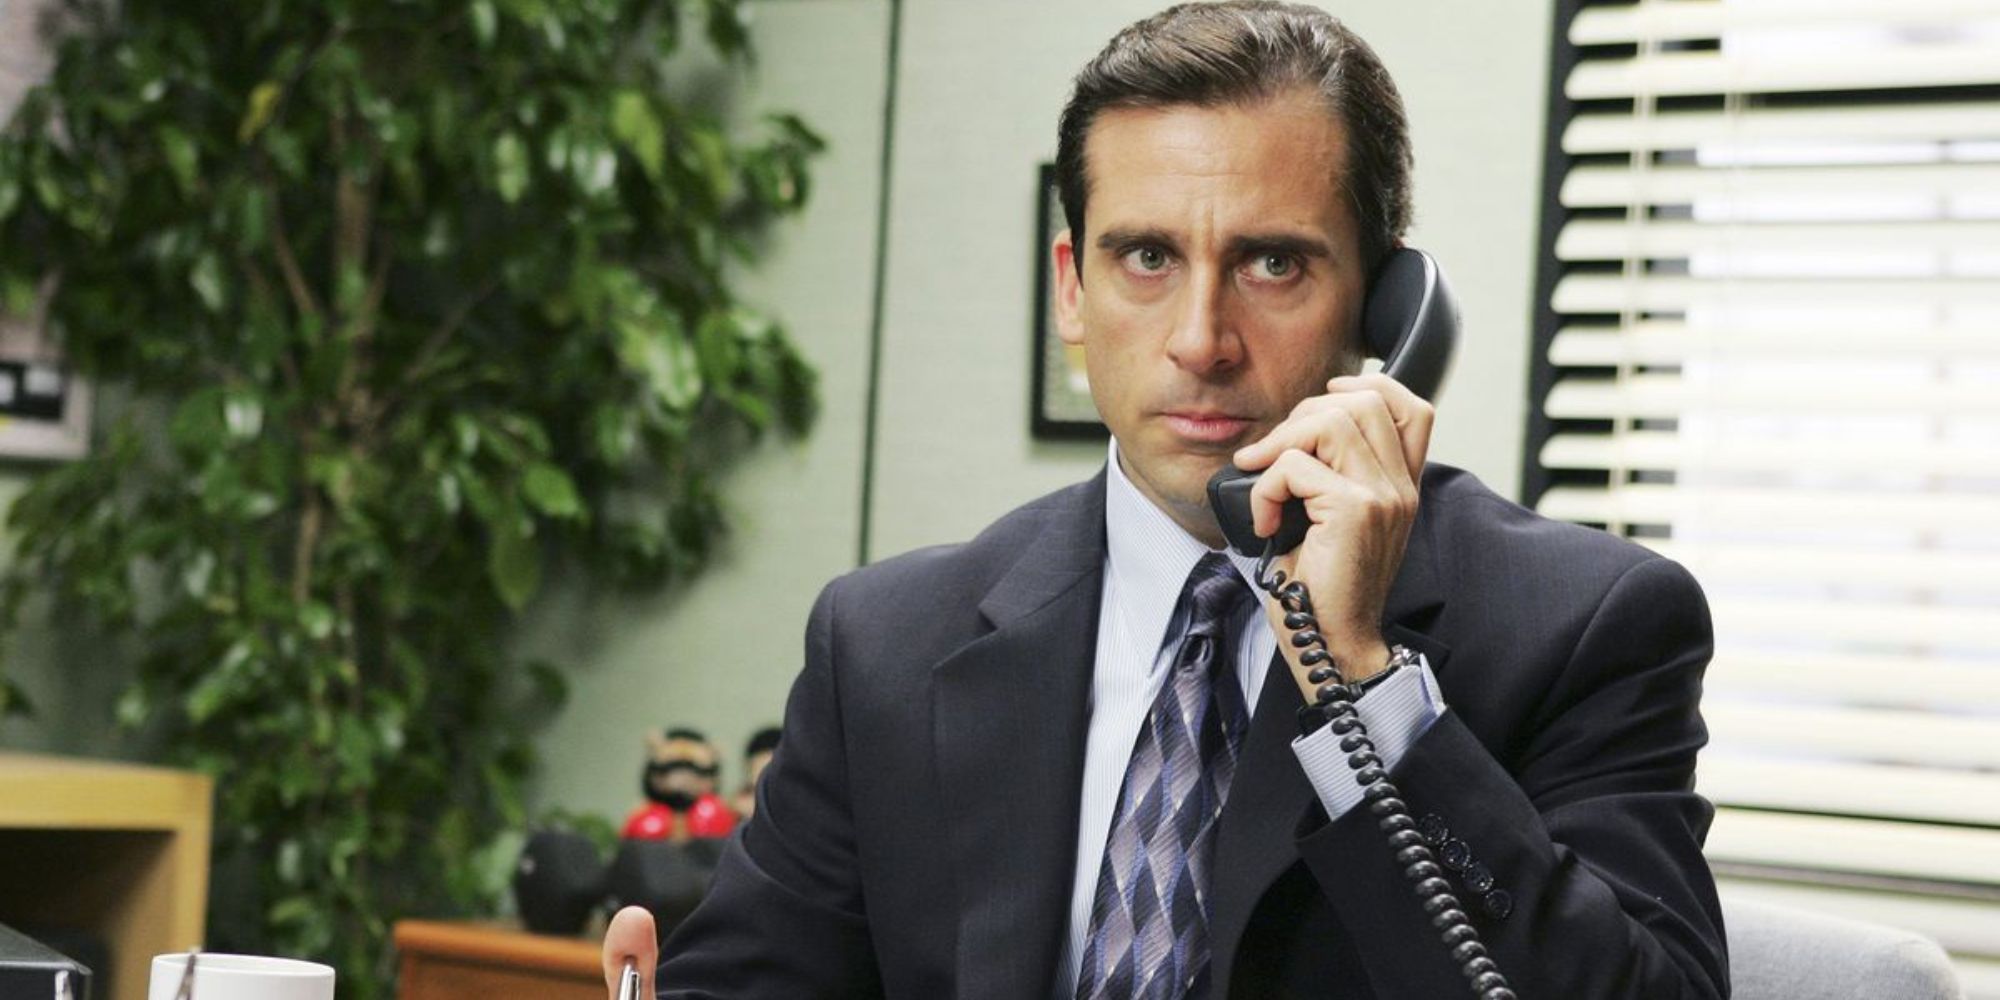 Michael Scott from The Office talking on the phone